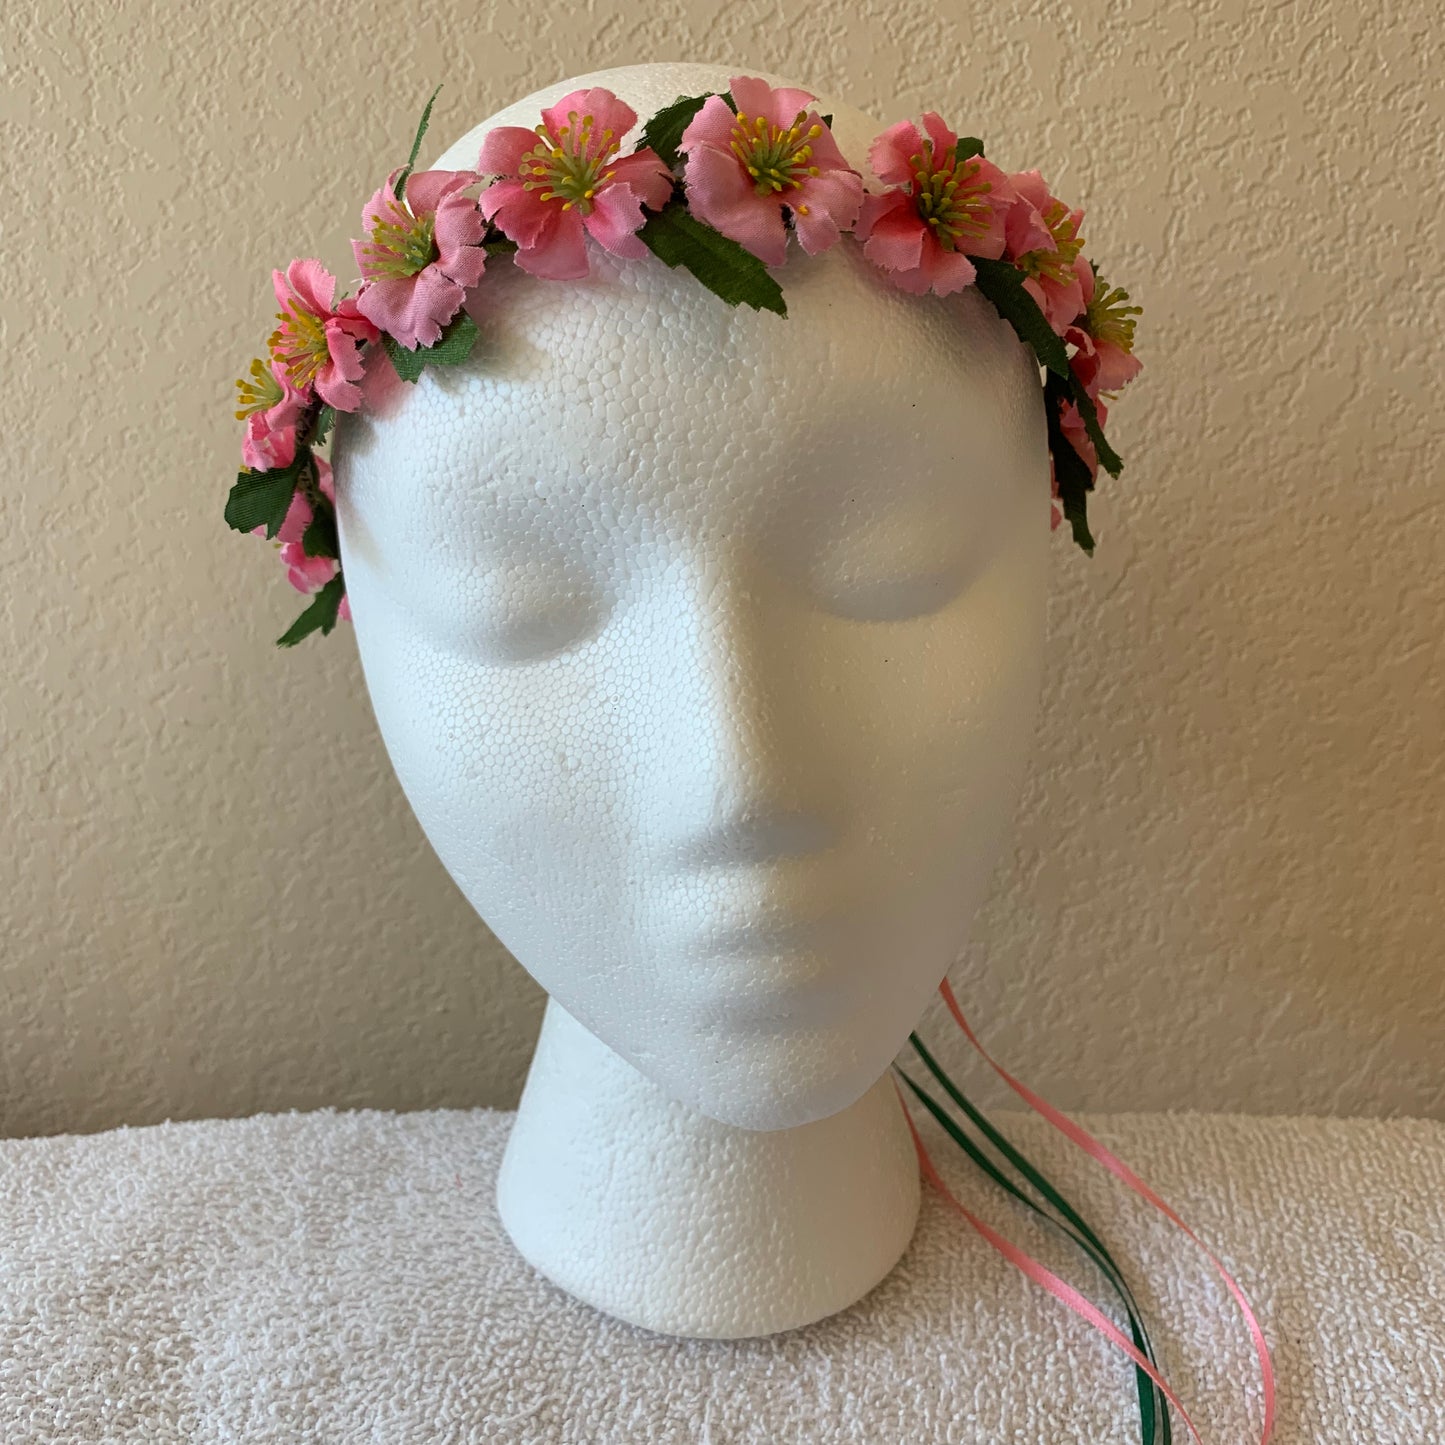 Extra Small Wreath - All pink flowers+